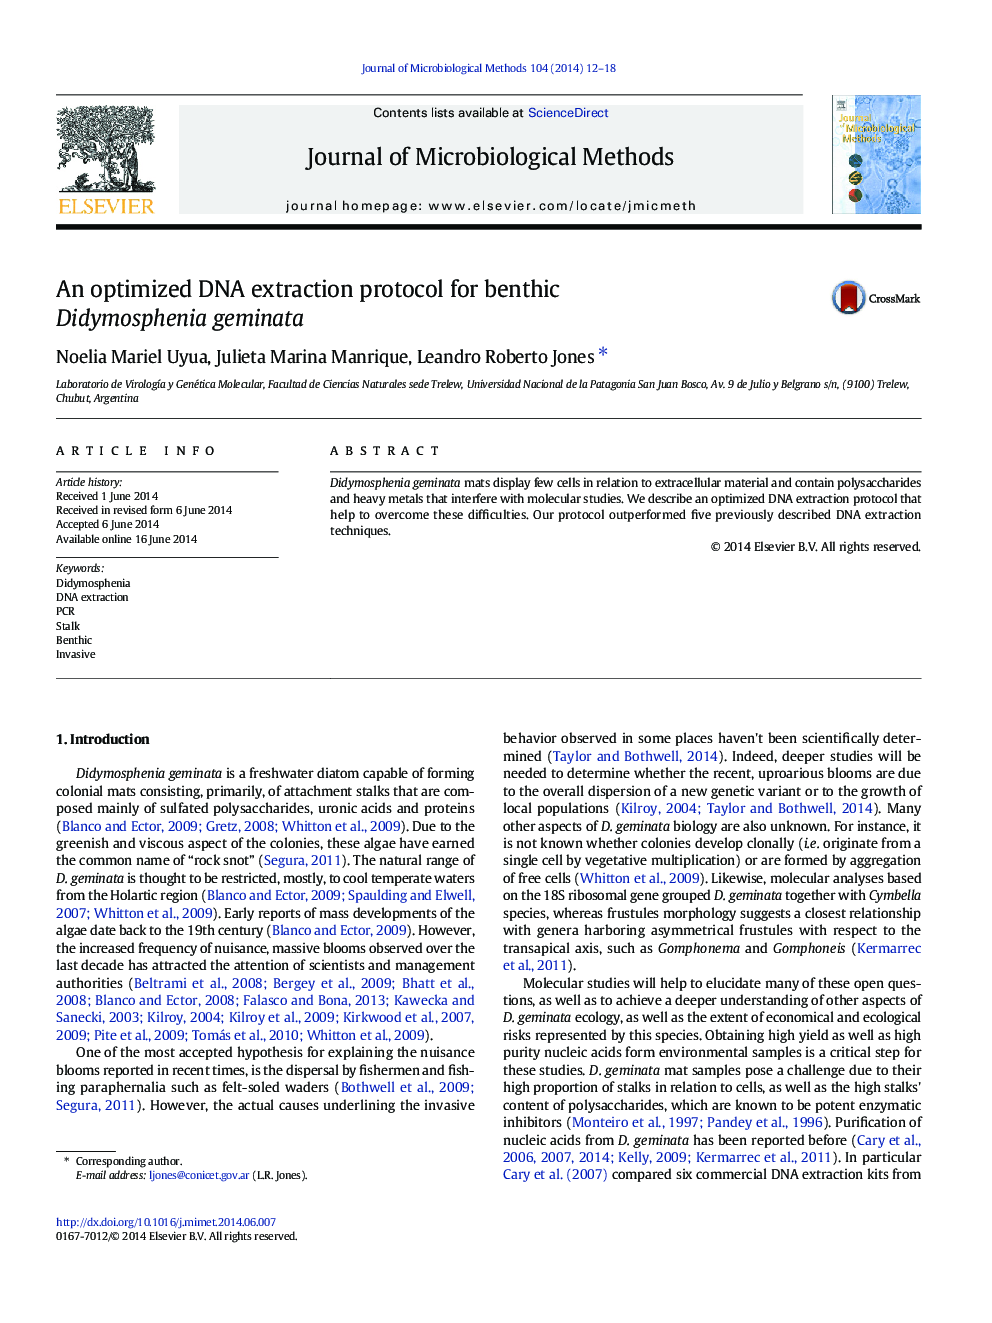 An optimized DNA extraction protocol for benthic Didymosphenia geminata